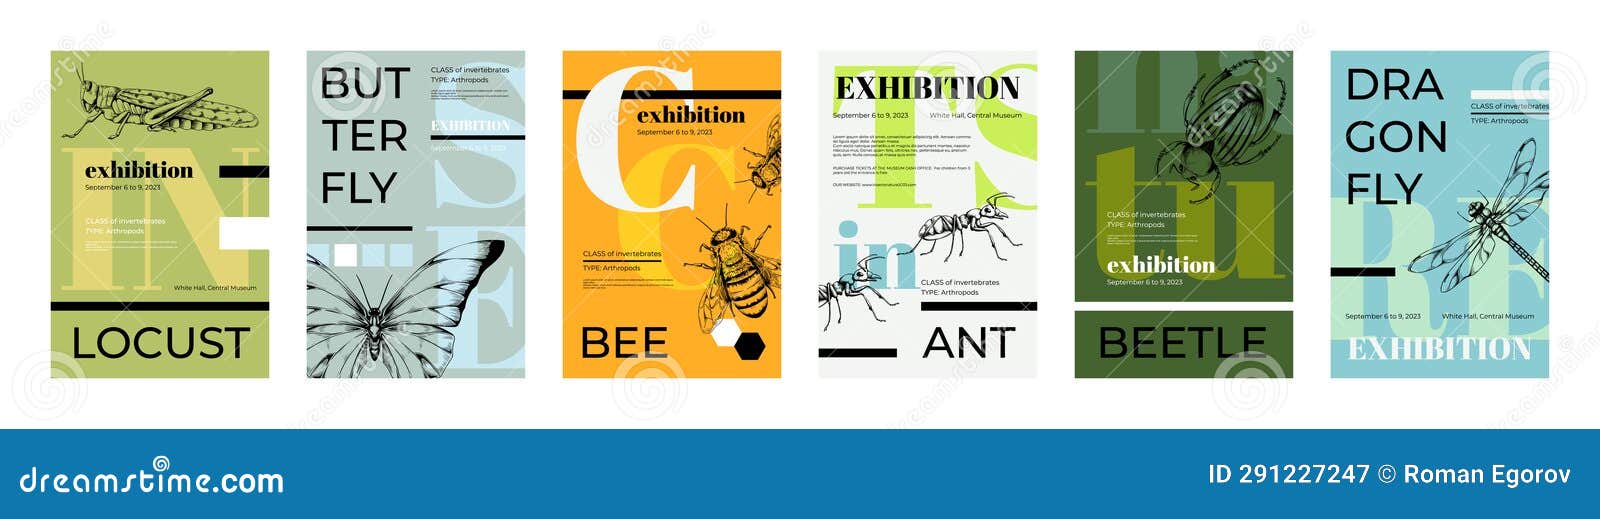 beetle posters. bee hipster collage. abstract book art. cover or mural for trendy music festival. entomology exhibition